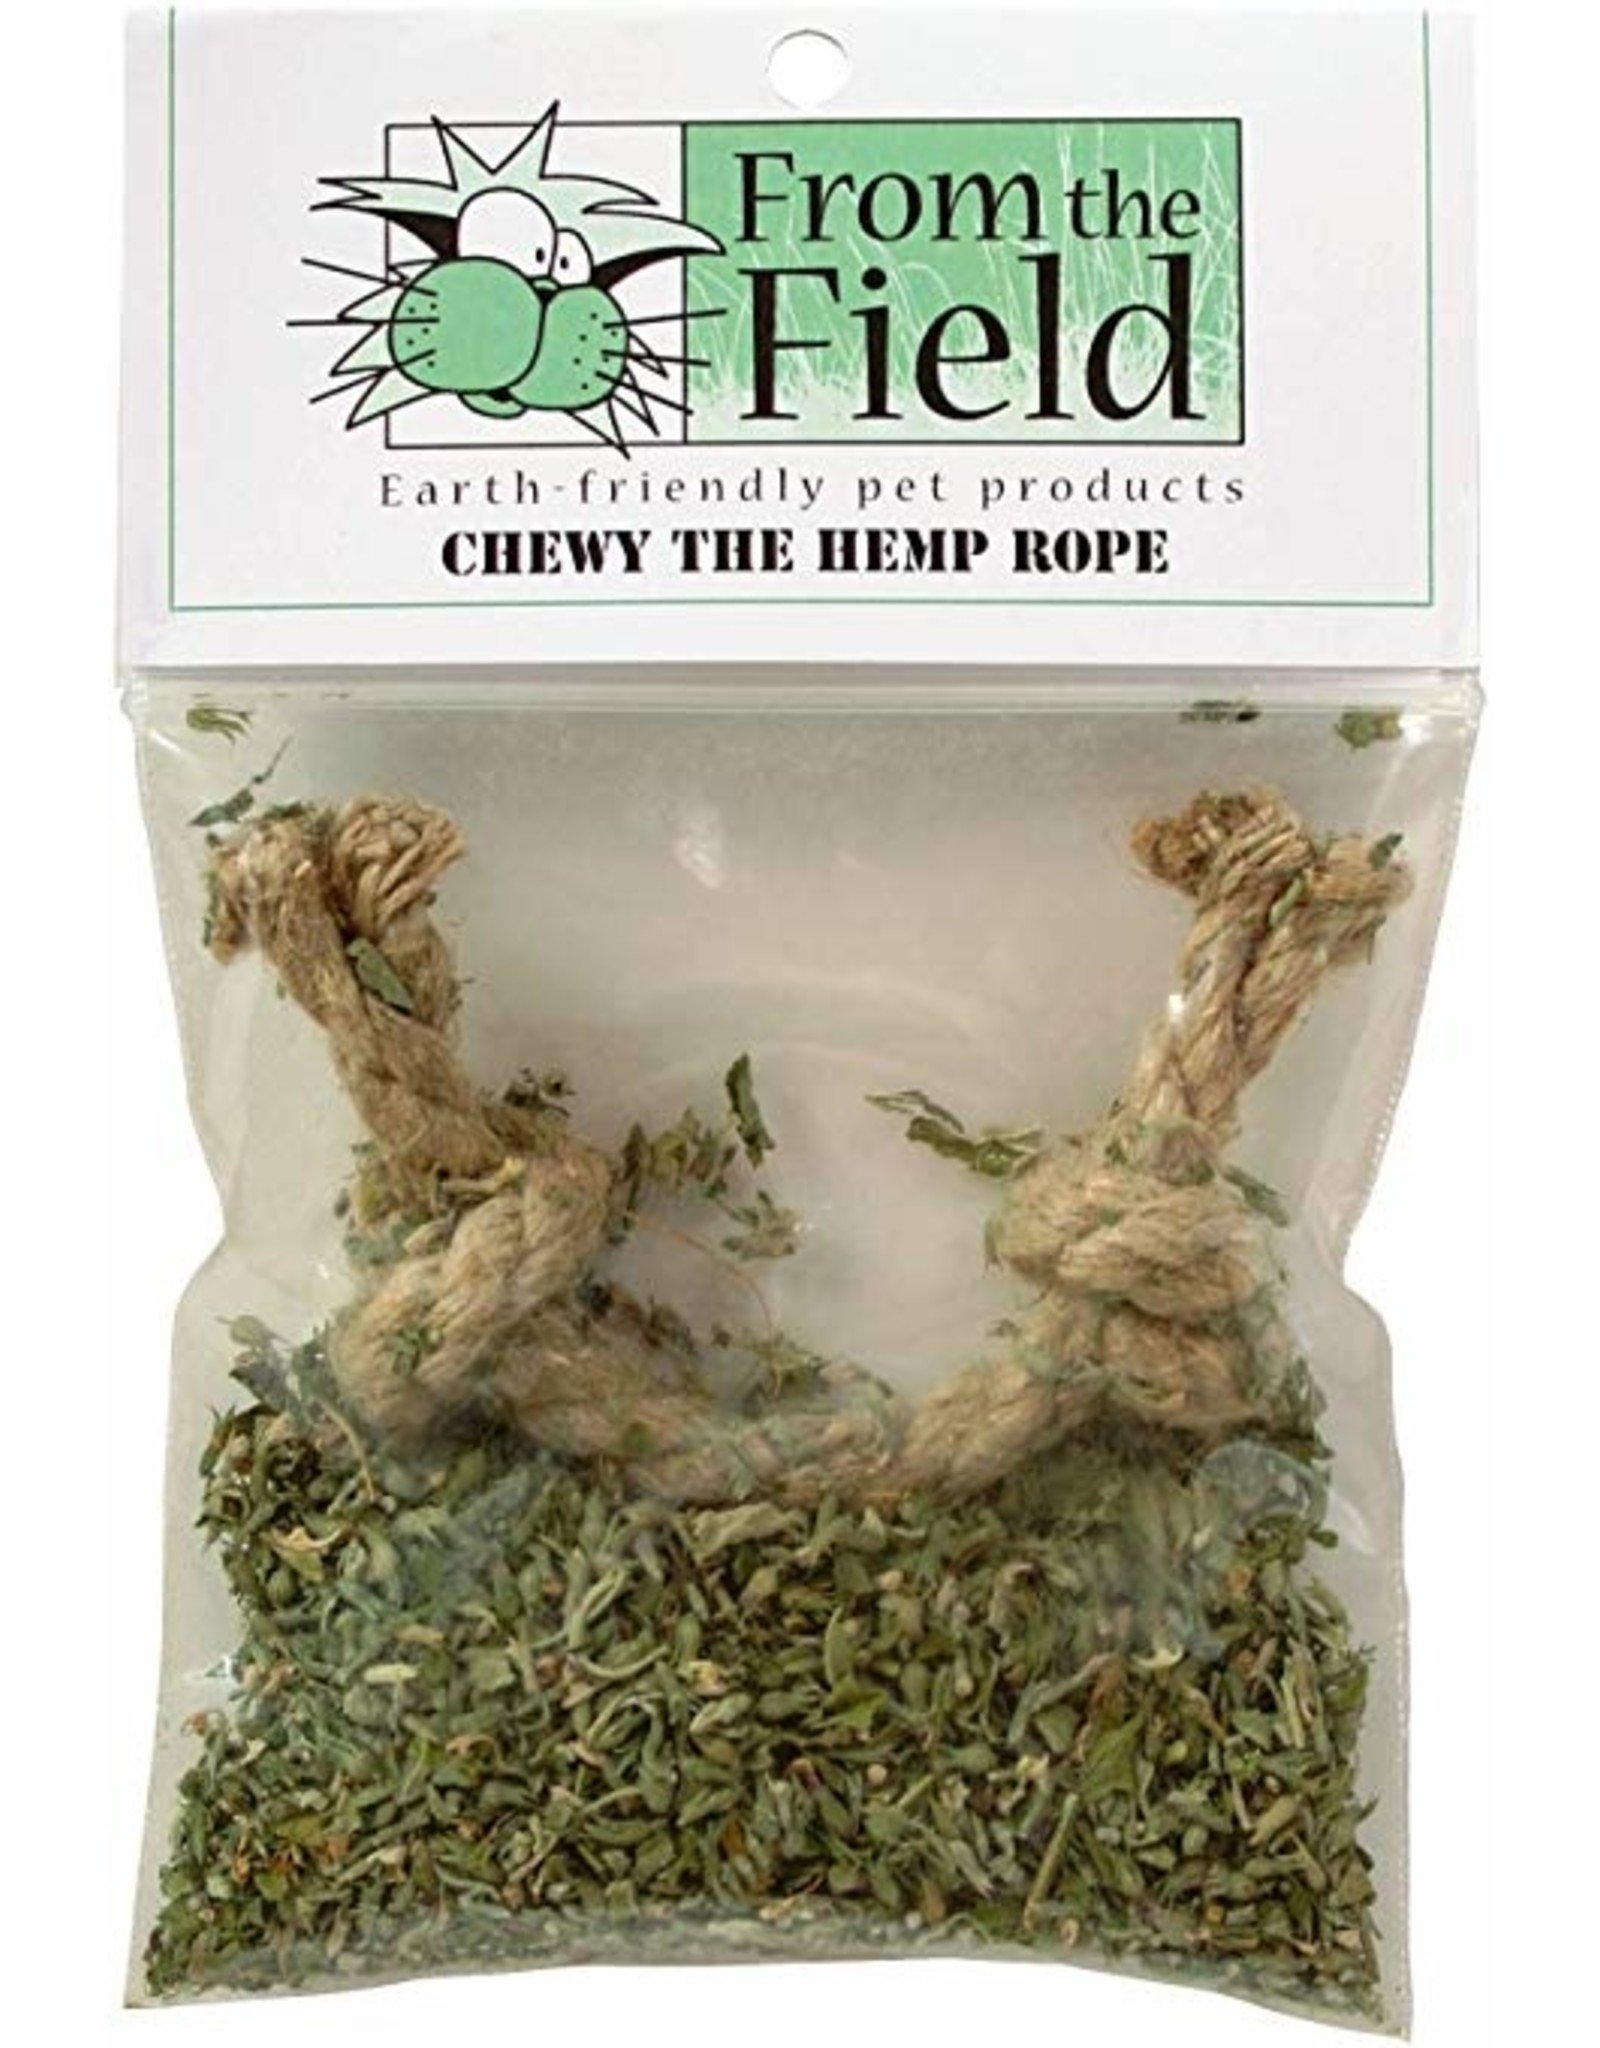 From The Field From the Field Chewy Hemp Rope